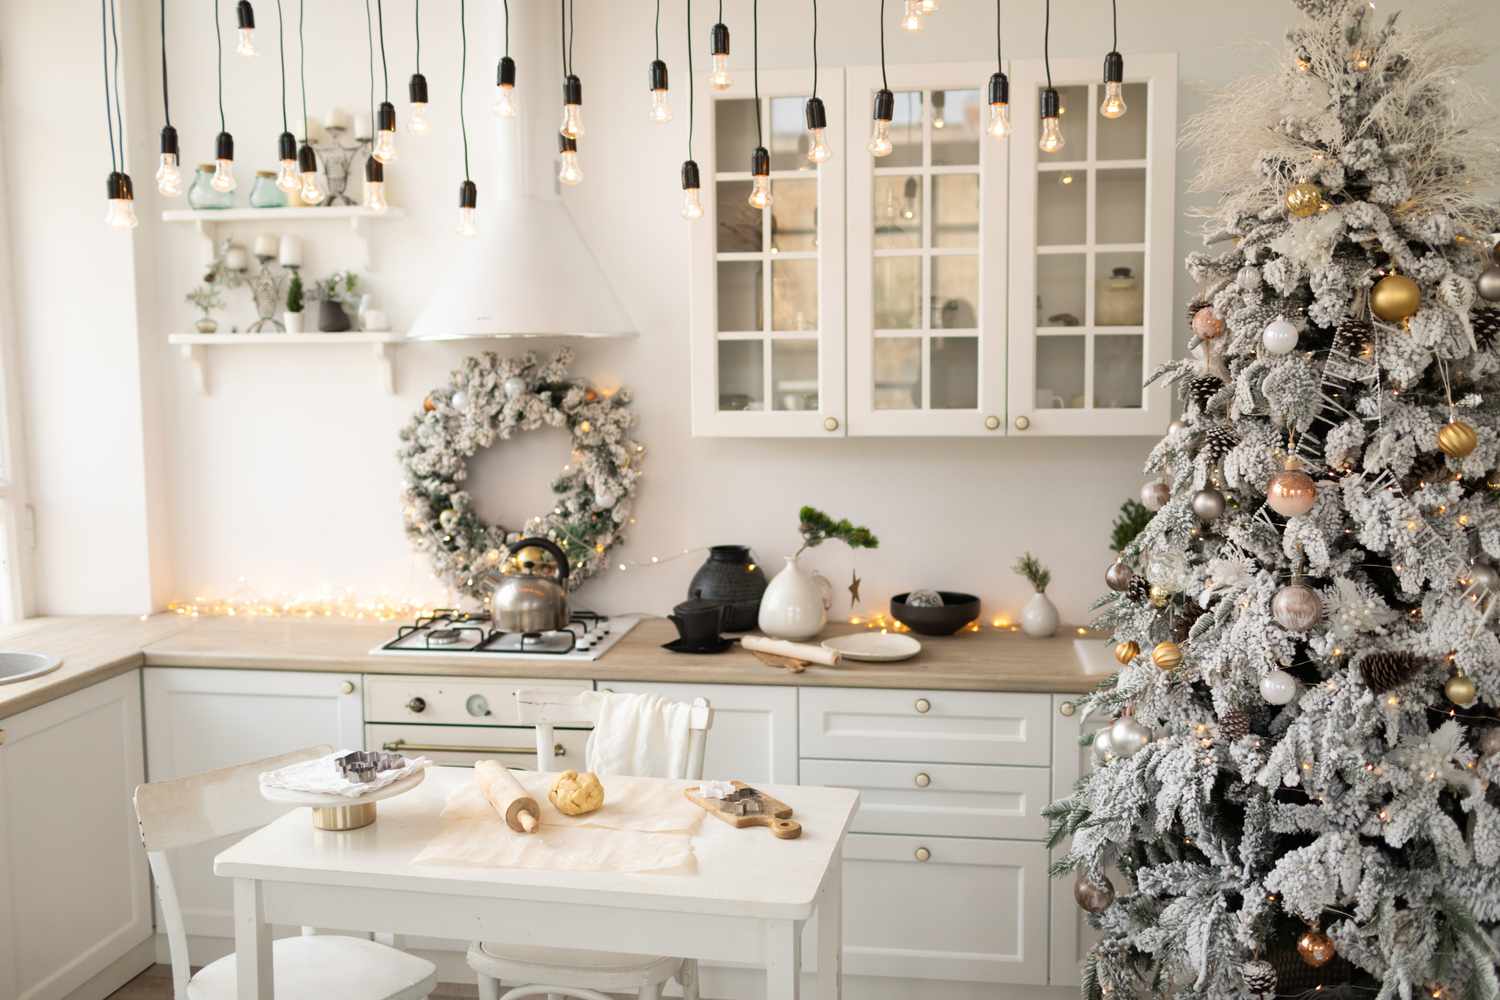 Best White Christmas Decor Ideas for a Winter Wonderland at Home